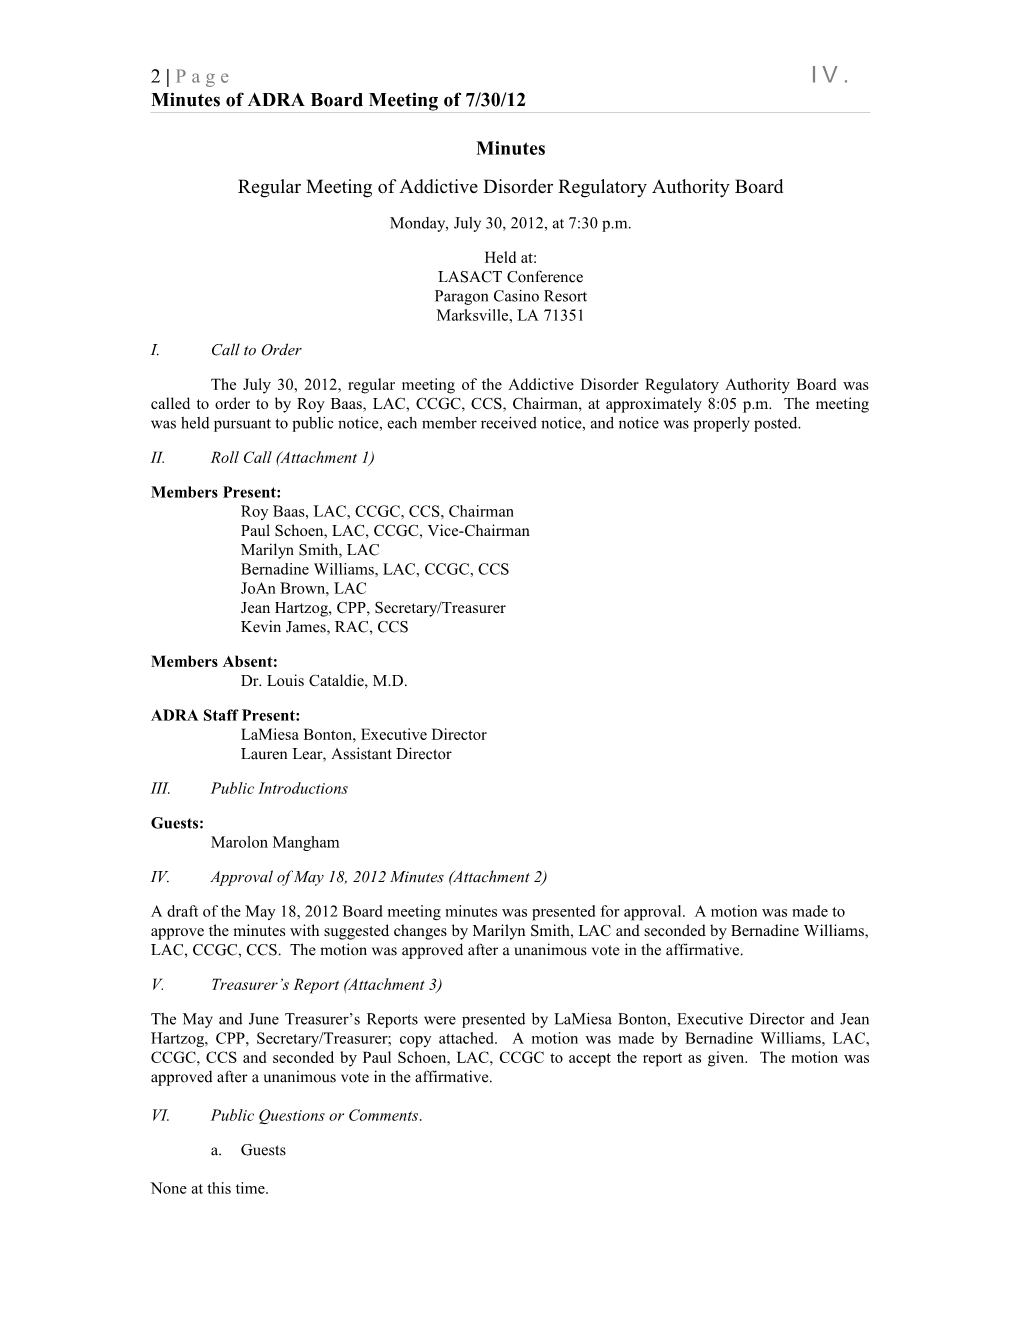 Minutes of ADRA Board Meeting of 7/30/12